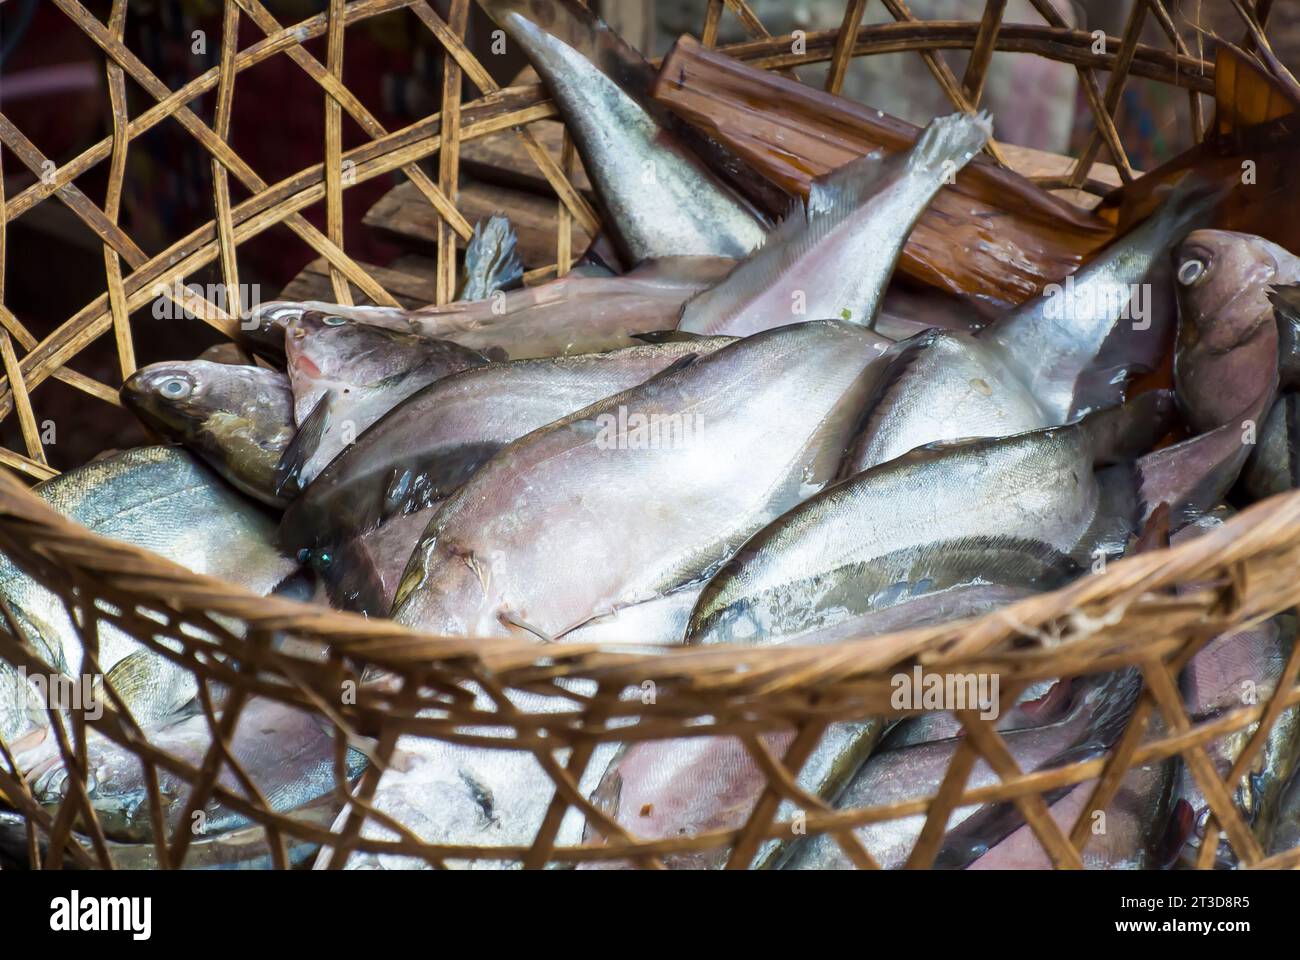 Fish - A Days Catch in Woven Basket Stock Photo